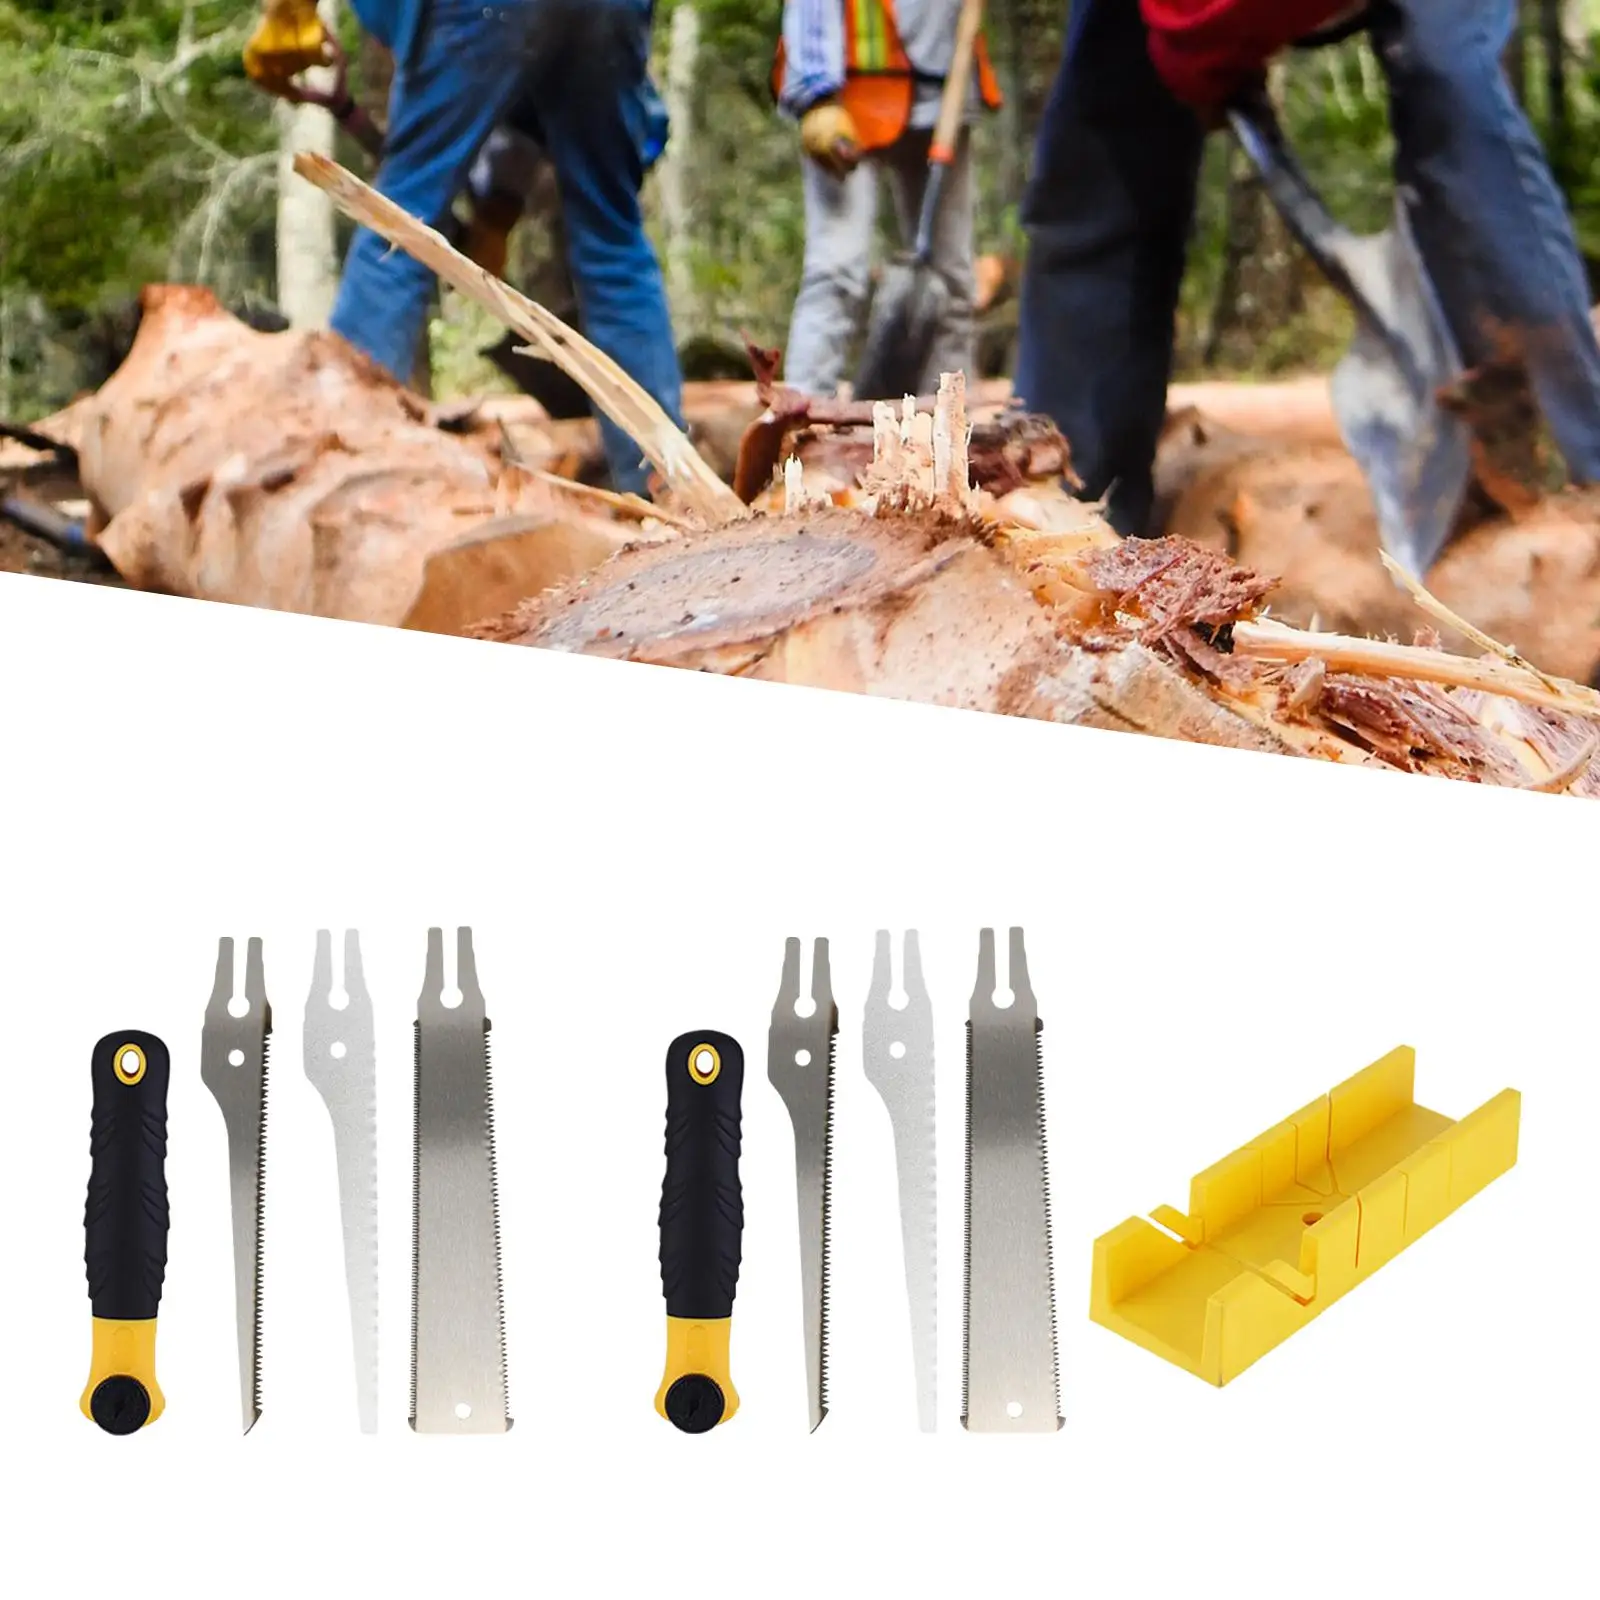 Japanese Hand Saw Multifunctional Woodworking Tool Pruning Hand Saw for DIY Pruning Trees Outdoor Gardening Trimming Branches